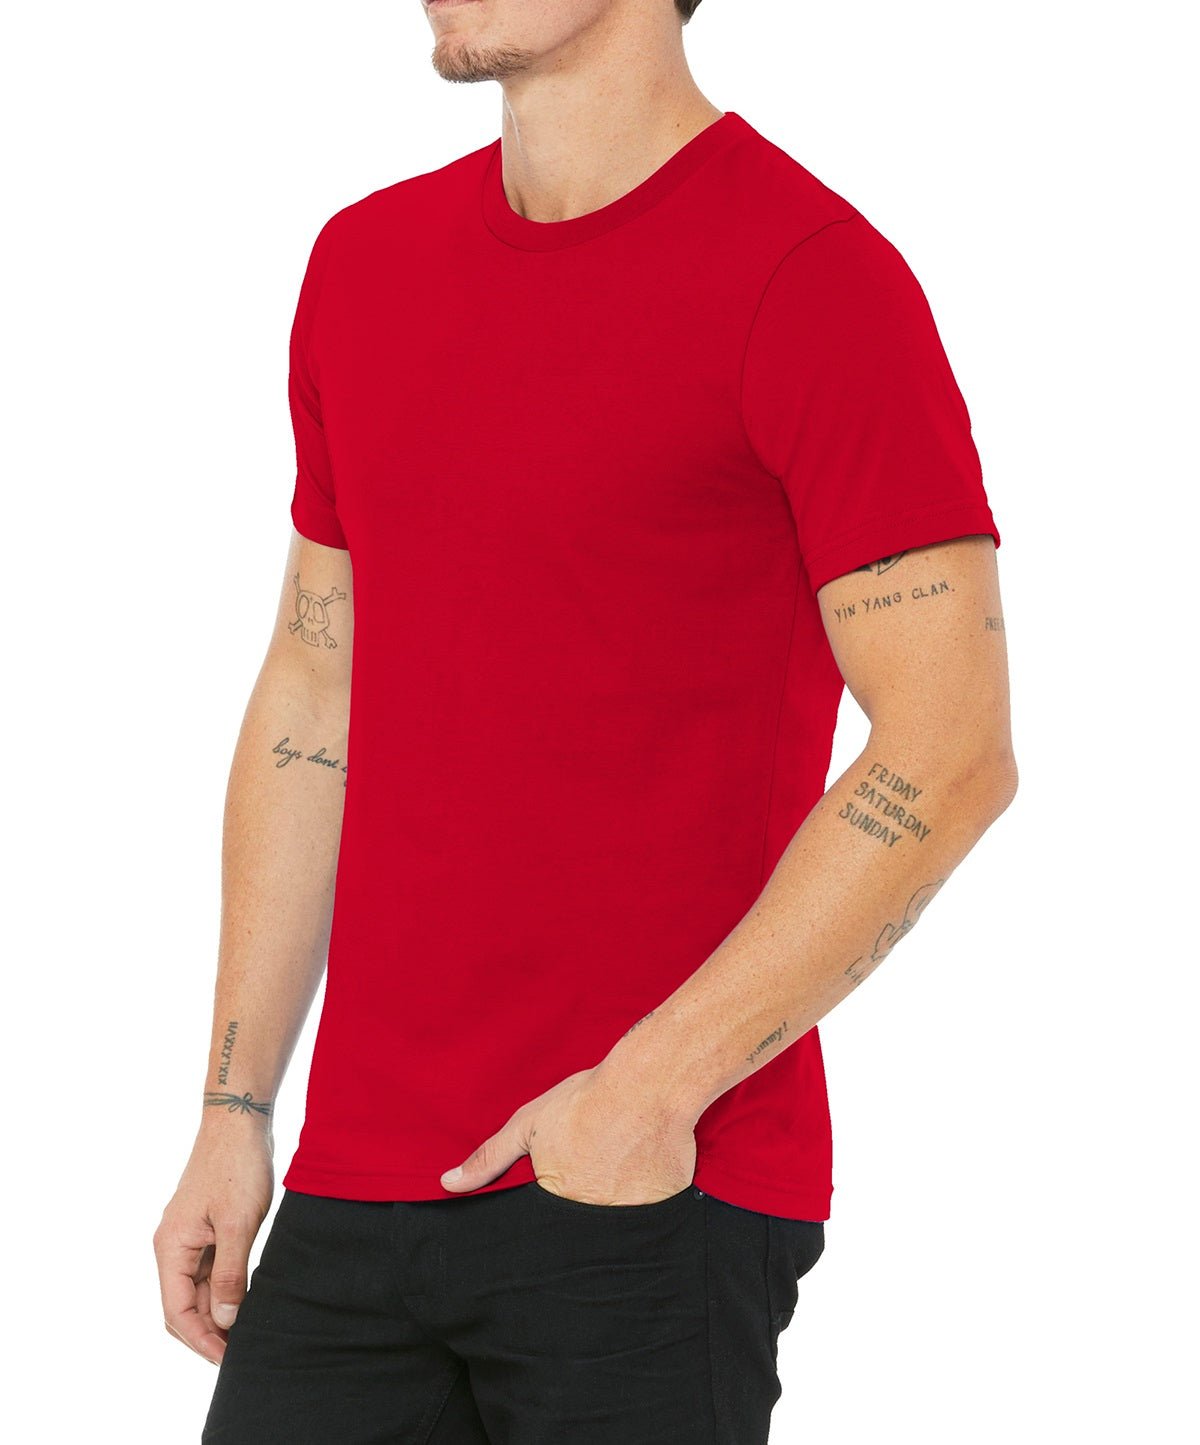 BELLA+CANVAS® Unisex Made In The USA Jersey T-shirt